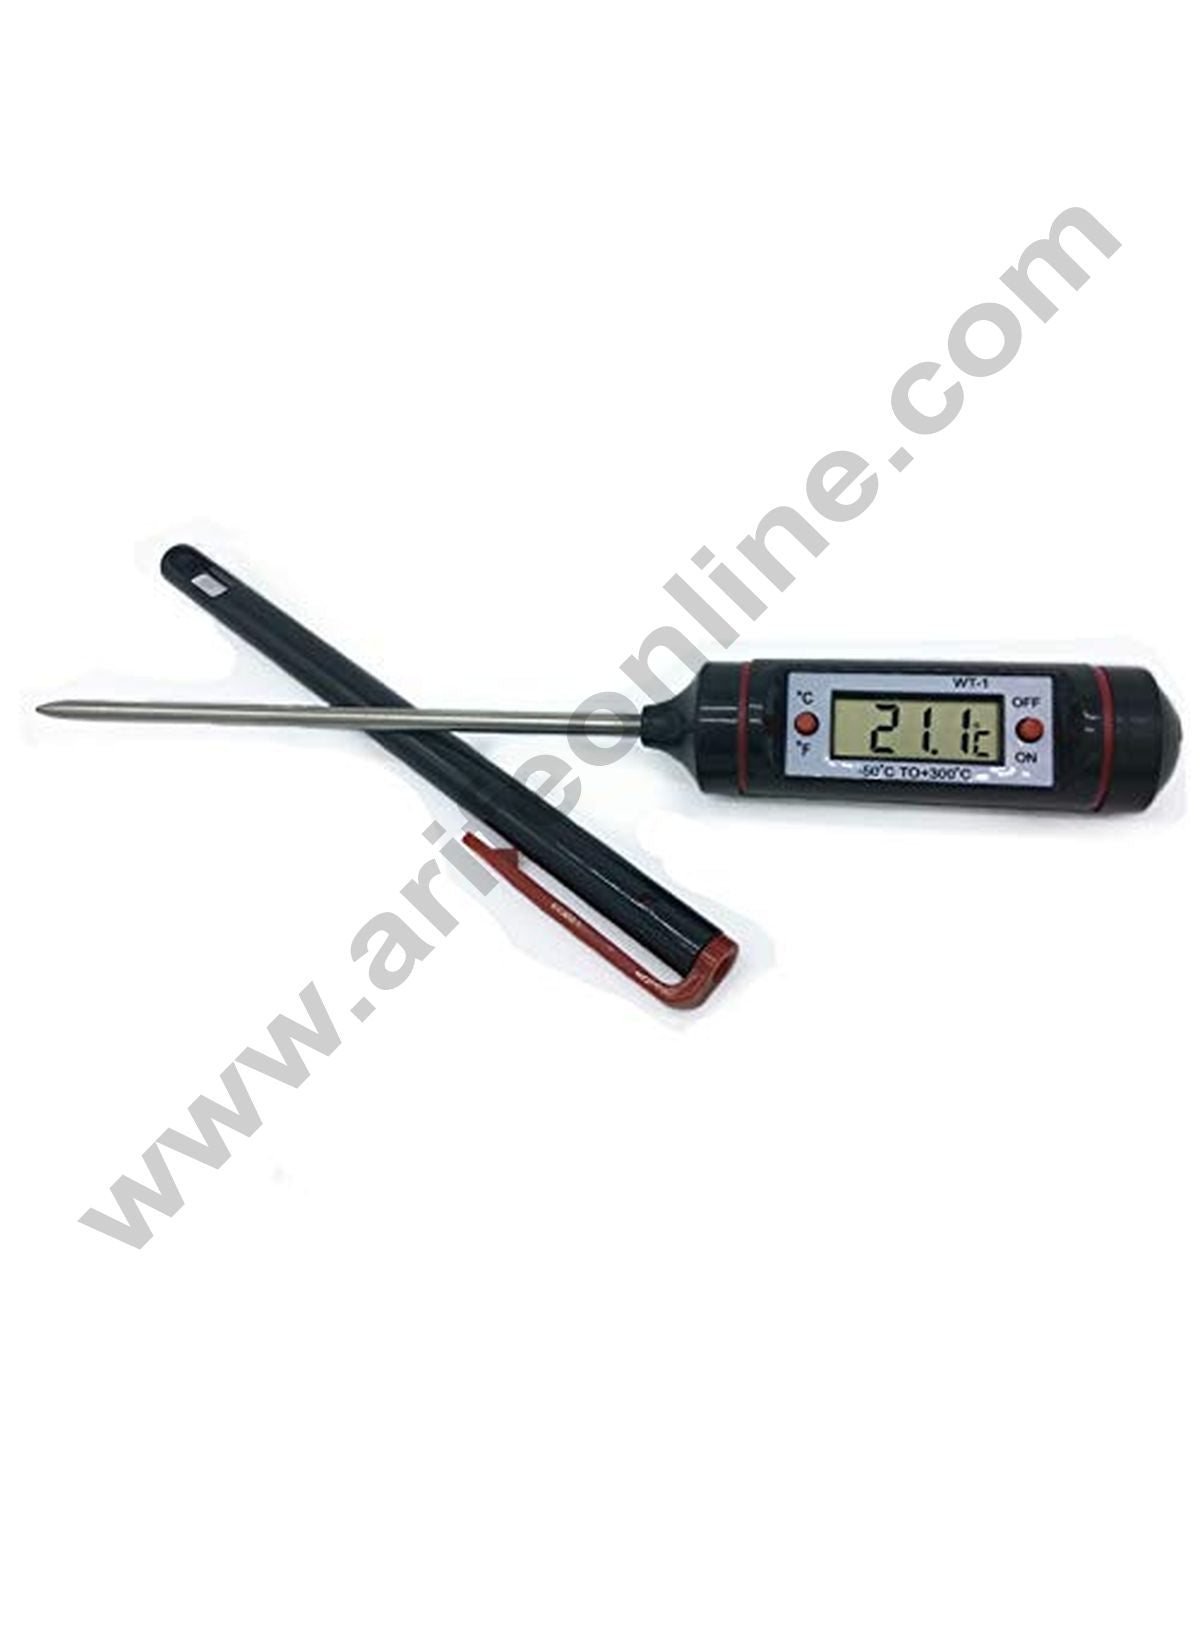 HABOTEST Instant Read Digital Meat LCD Thermometer for Food Bread Baking  Thermometer for Cooking and Grilling and BBQ - Walmart.com